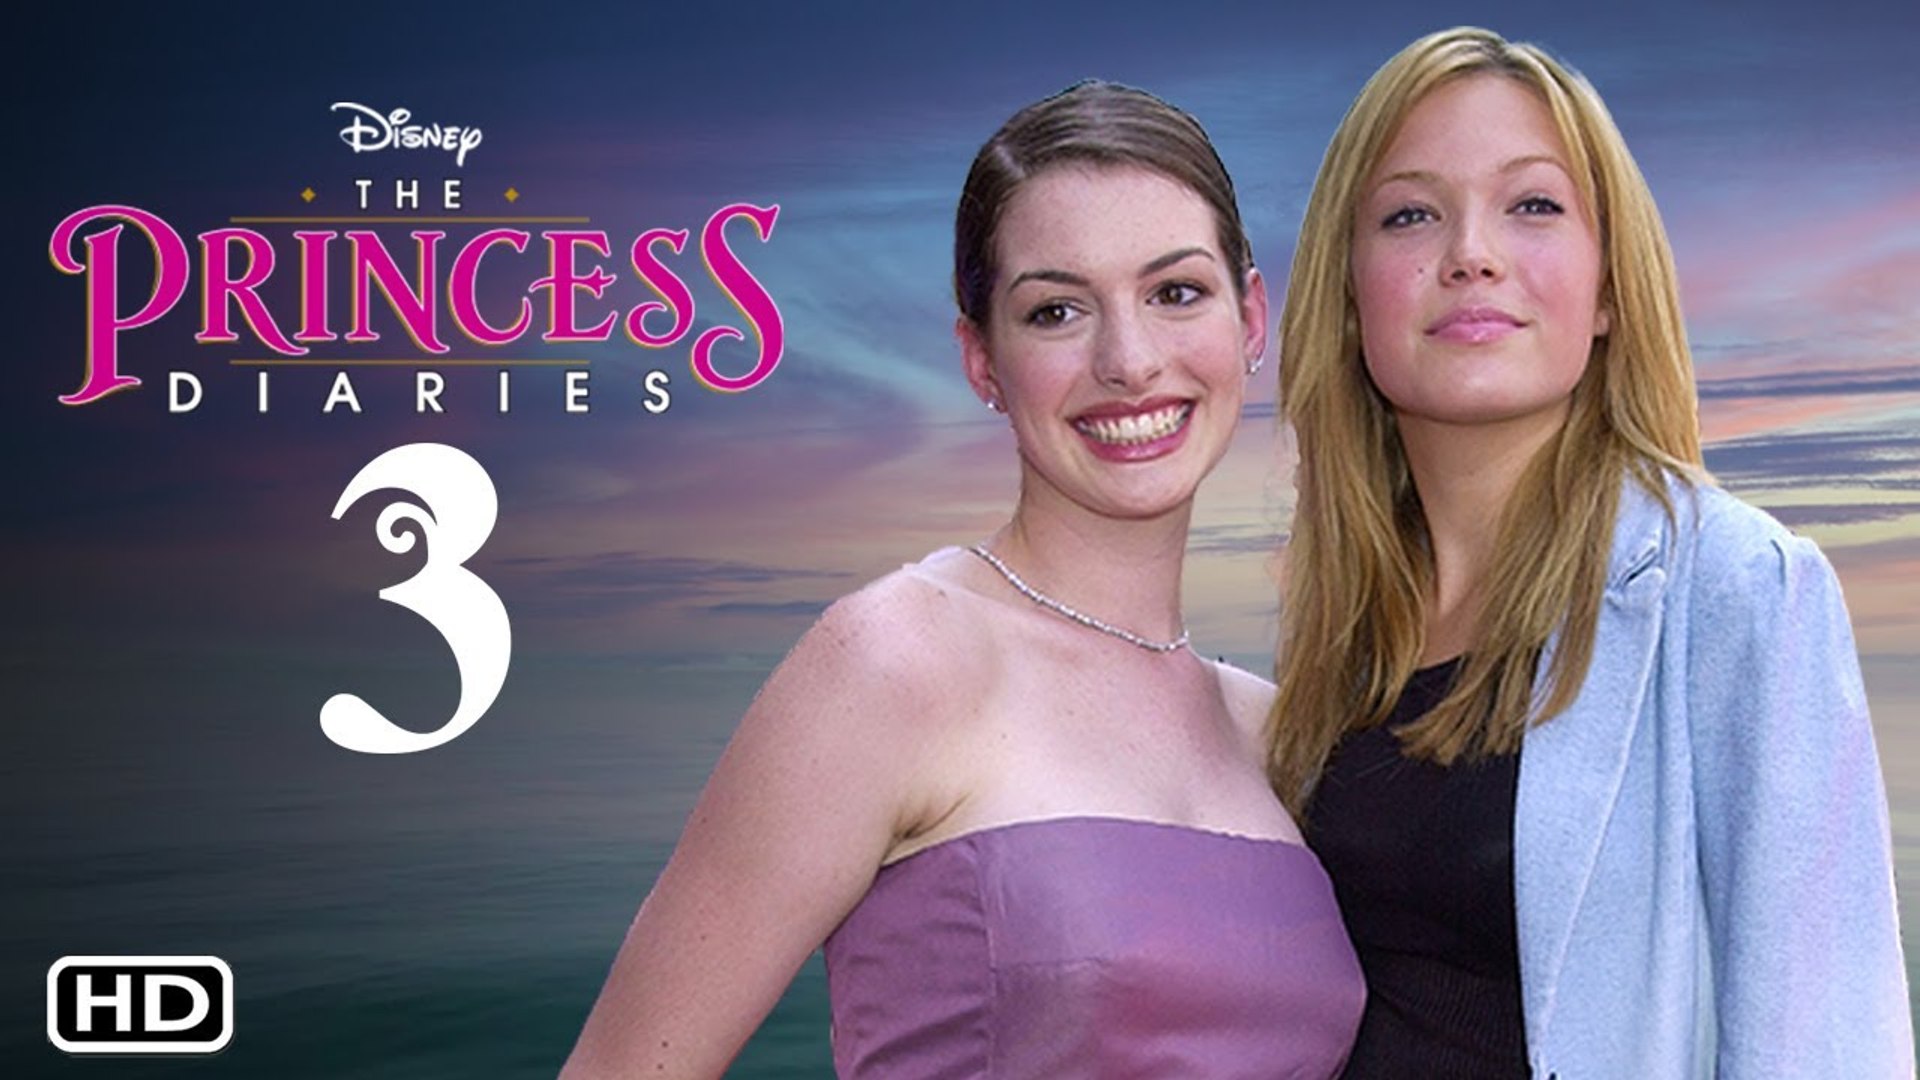 The Princess Diaries 3 Trailer (2022) Disney+, Release Date, Cast, Anne  Hathaway, Hector Elizondo, - video Dailymotion